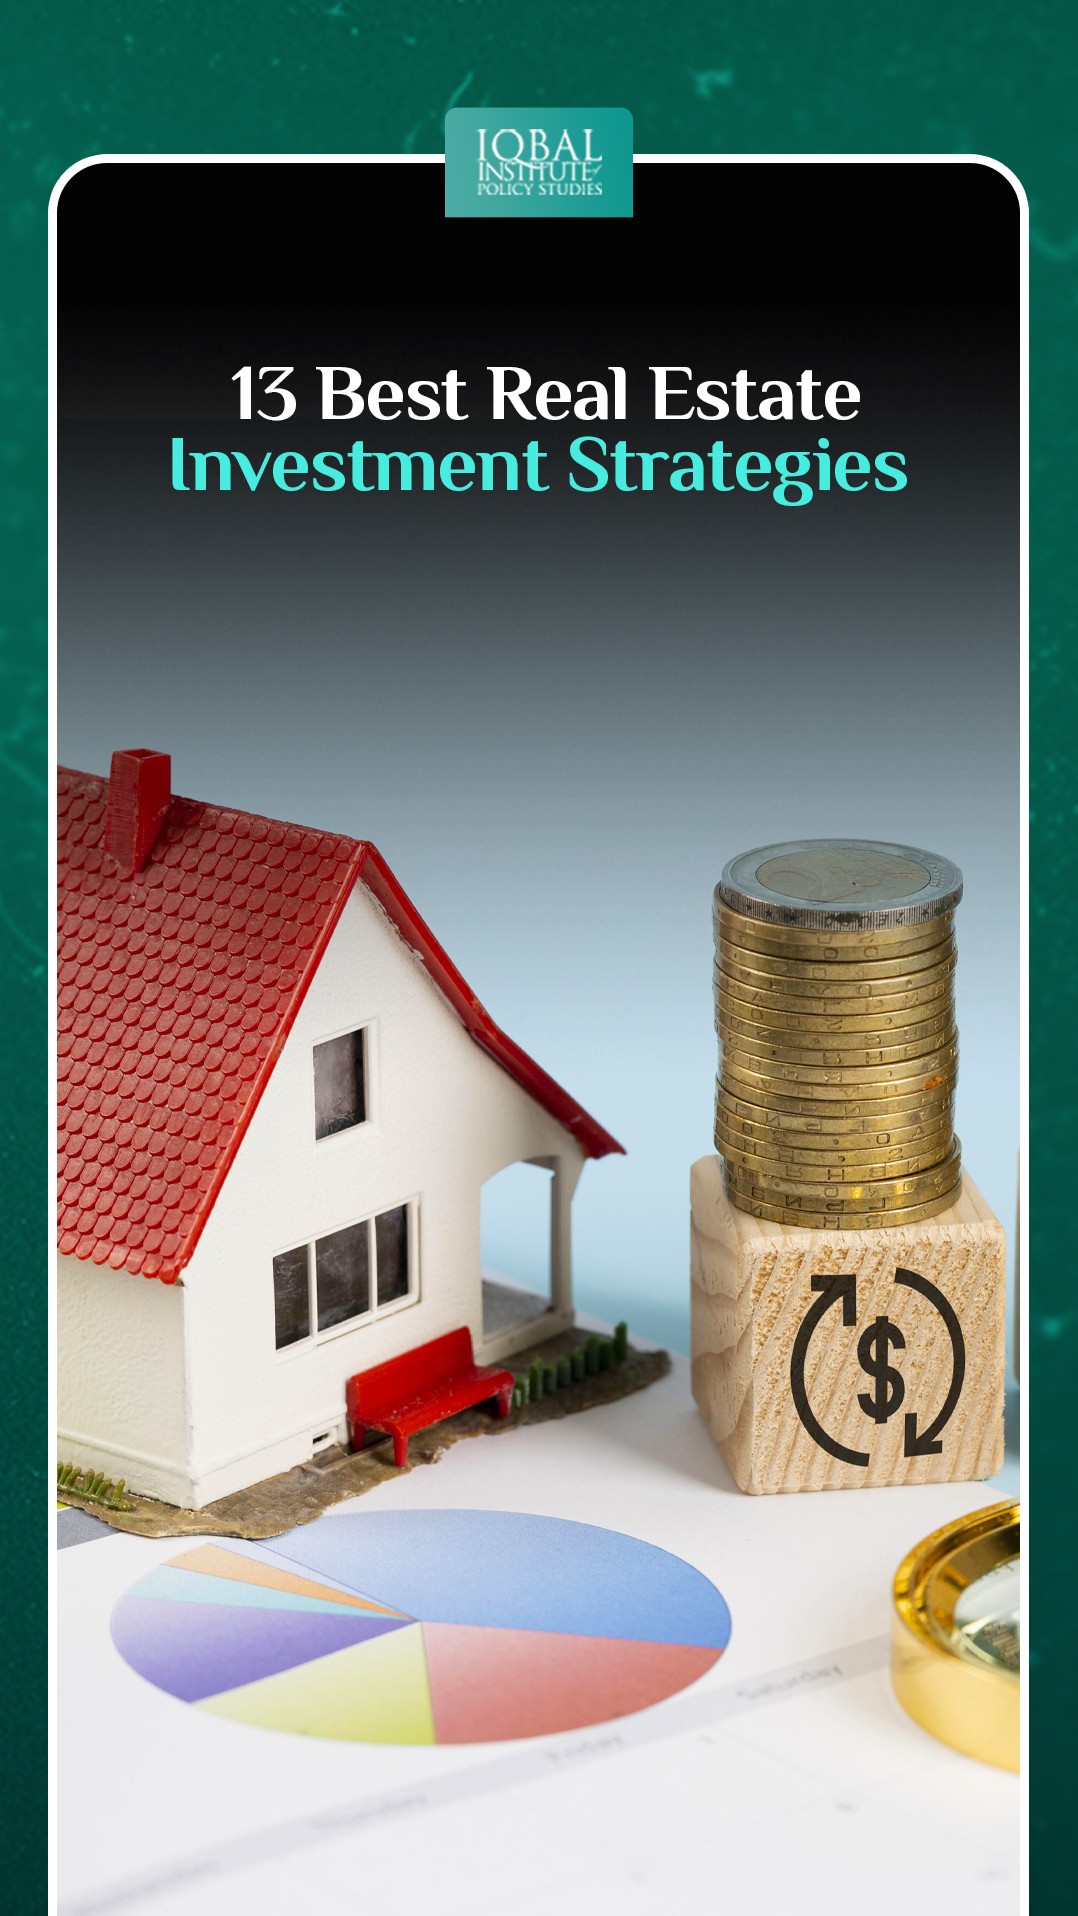 13 Best Real Estate Investment Strategies